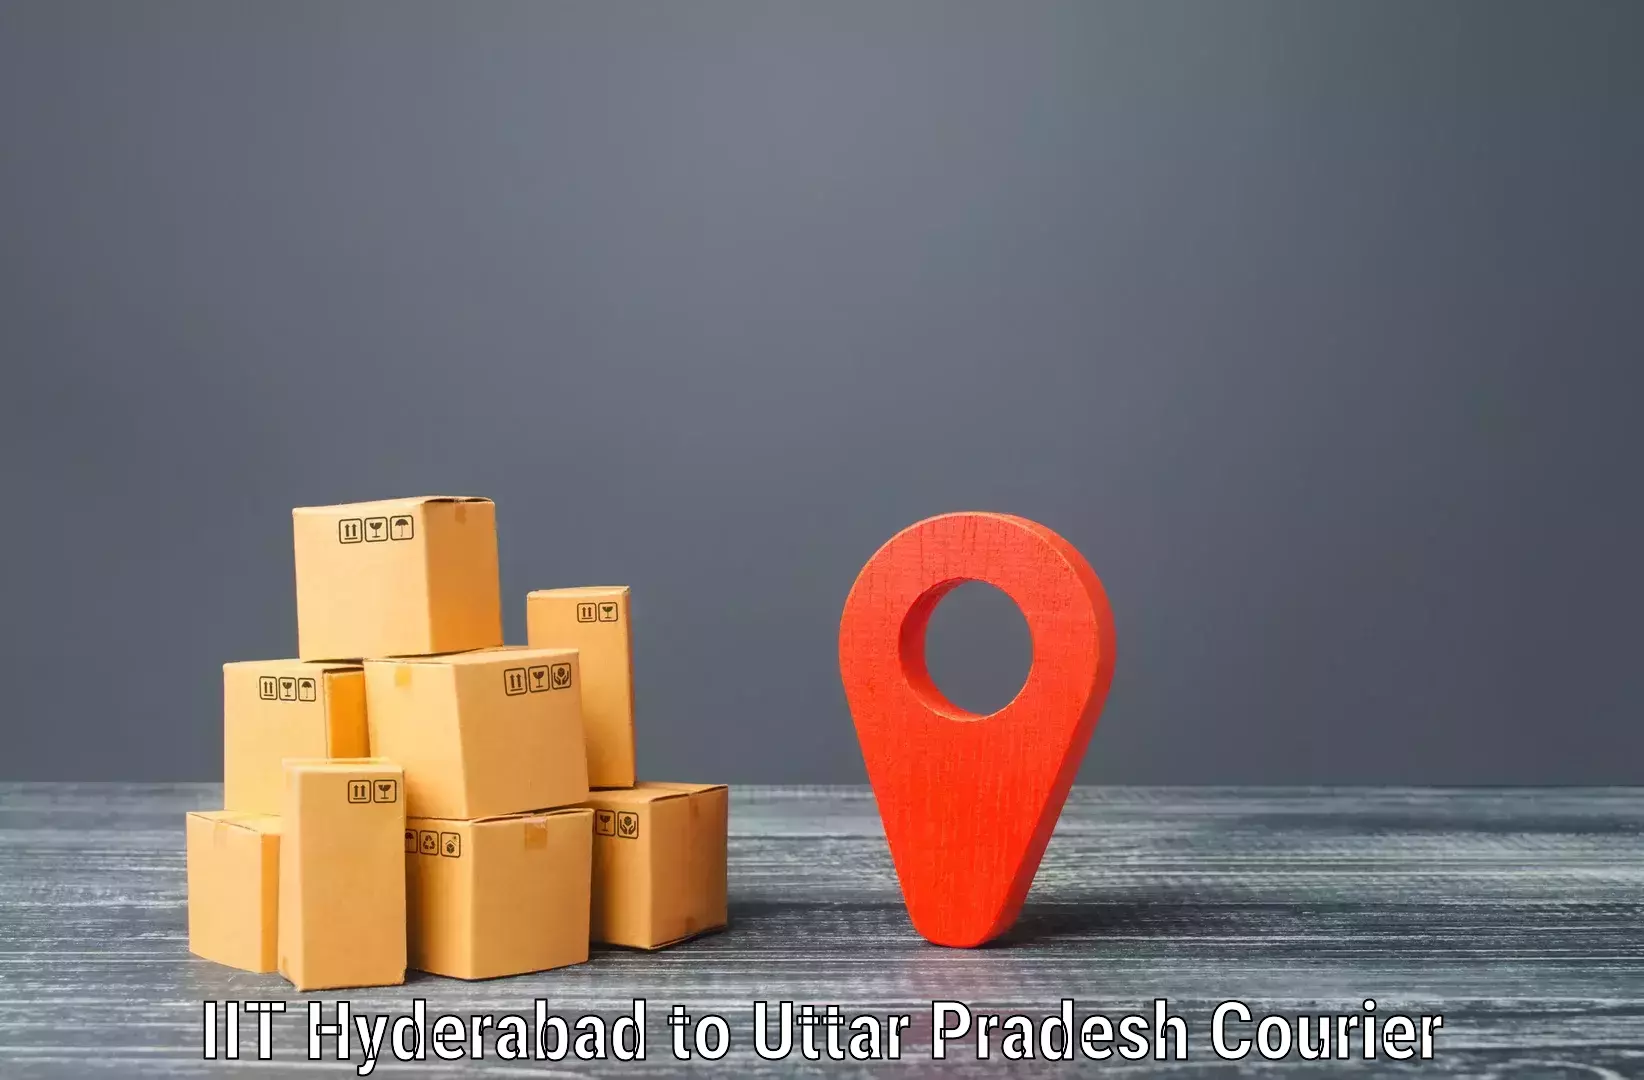 Reliable logistics providers in IIT Hyderabad to Rampur Maniharan